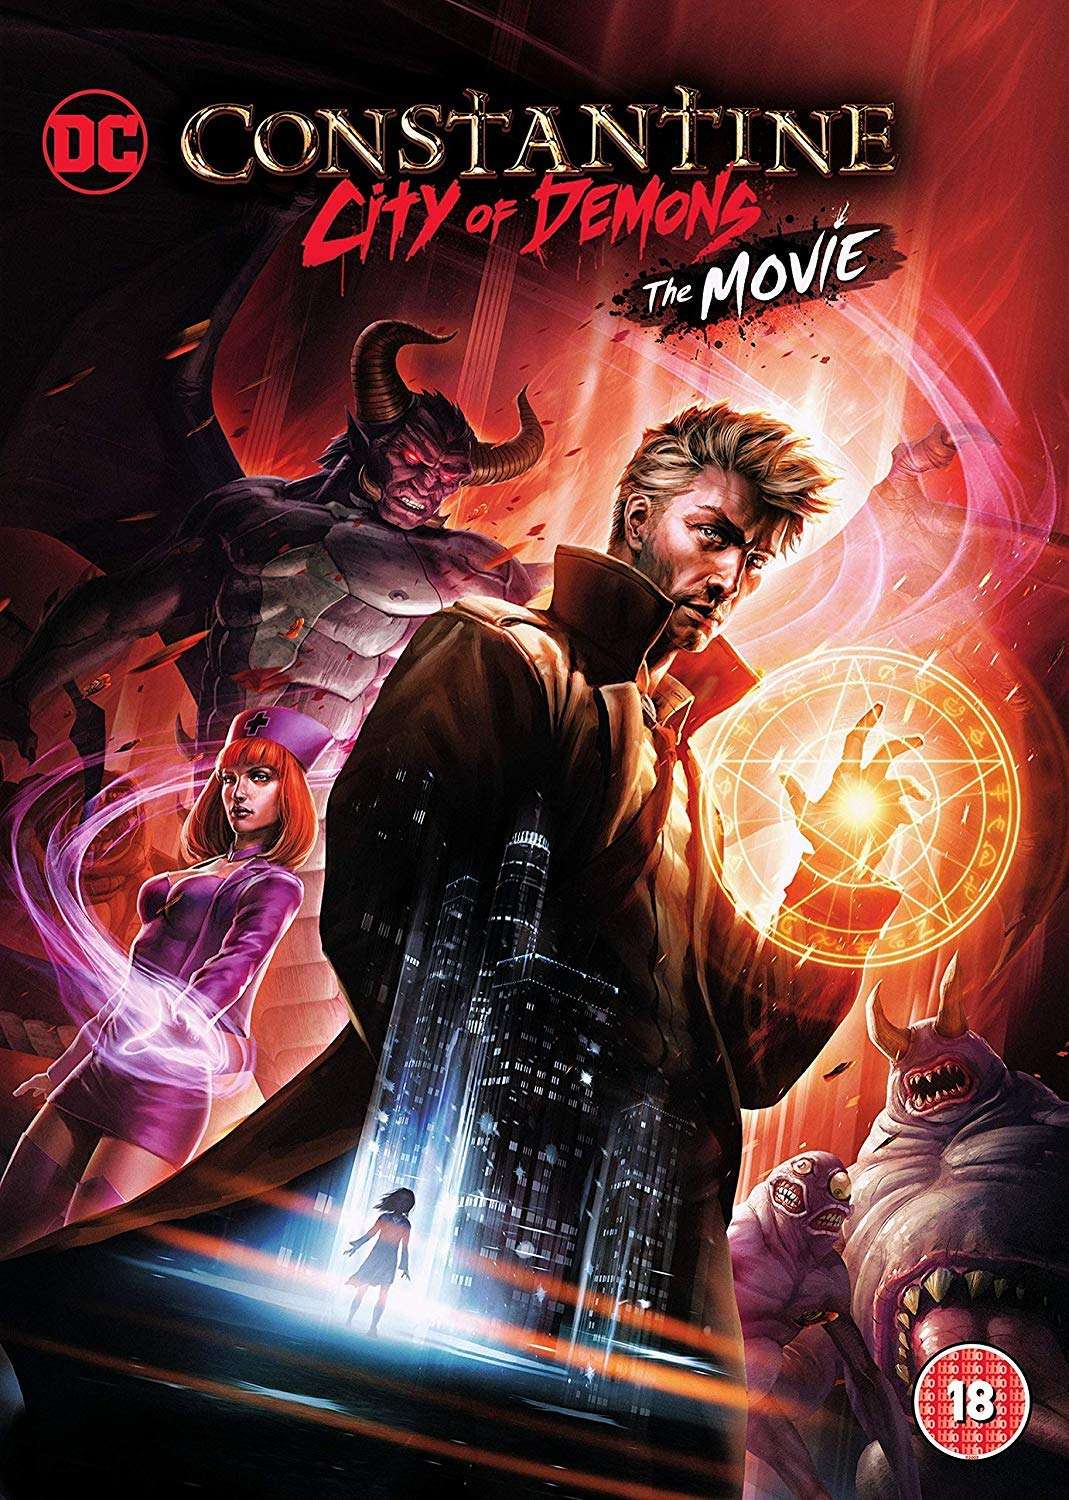 Constantine City of Demons - The Movie - Based On Constantine's TV series